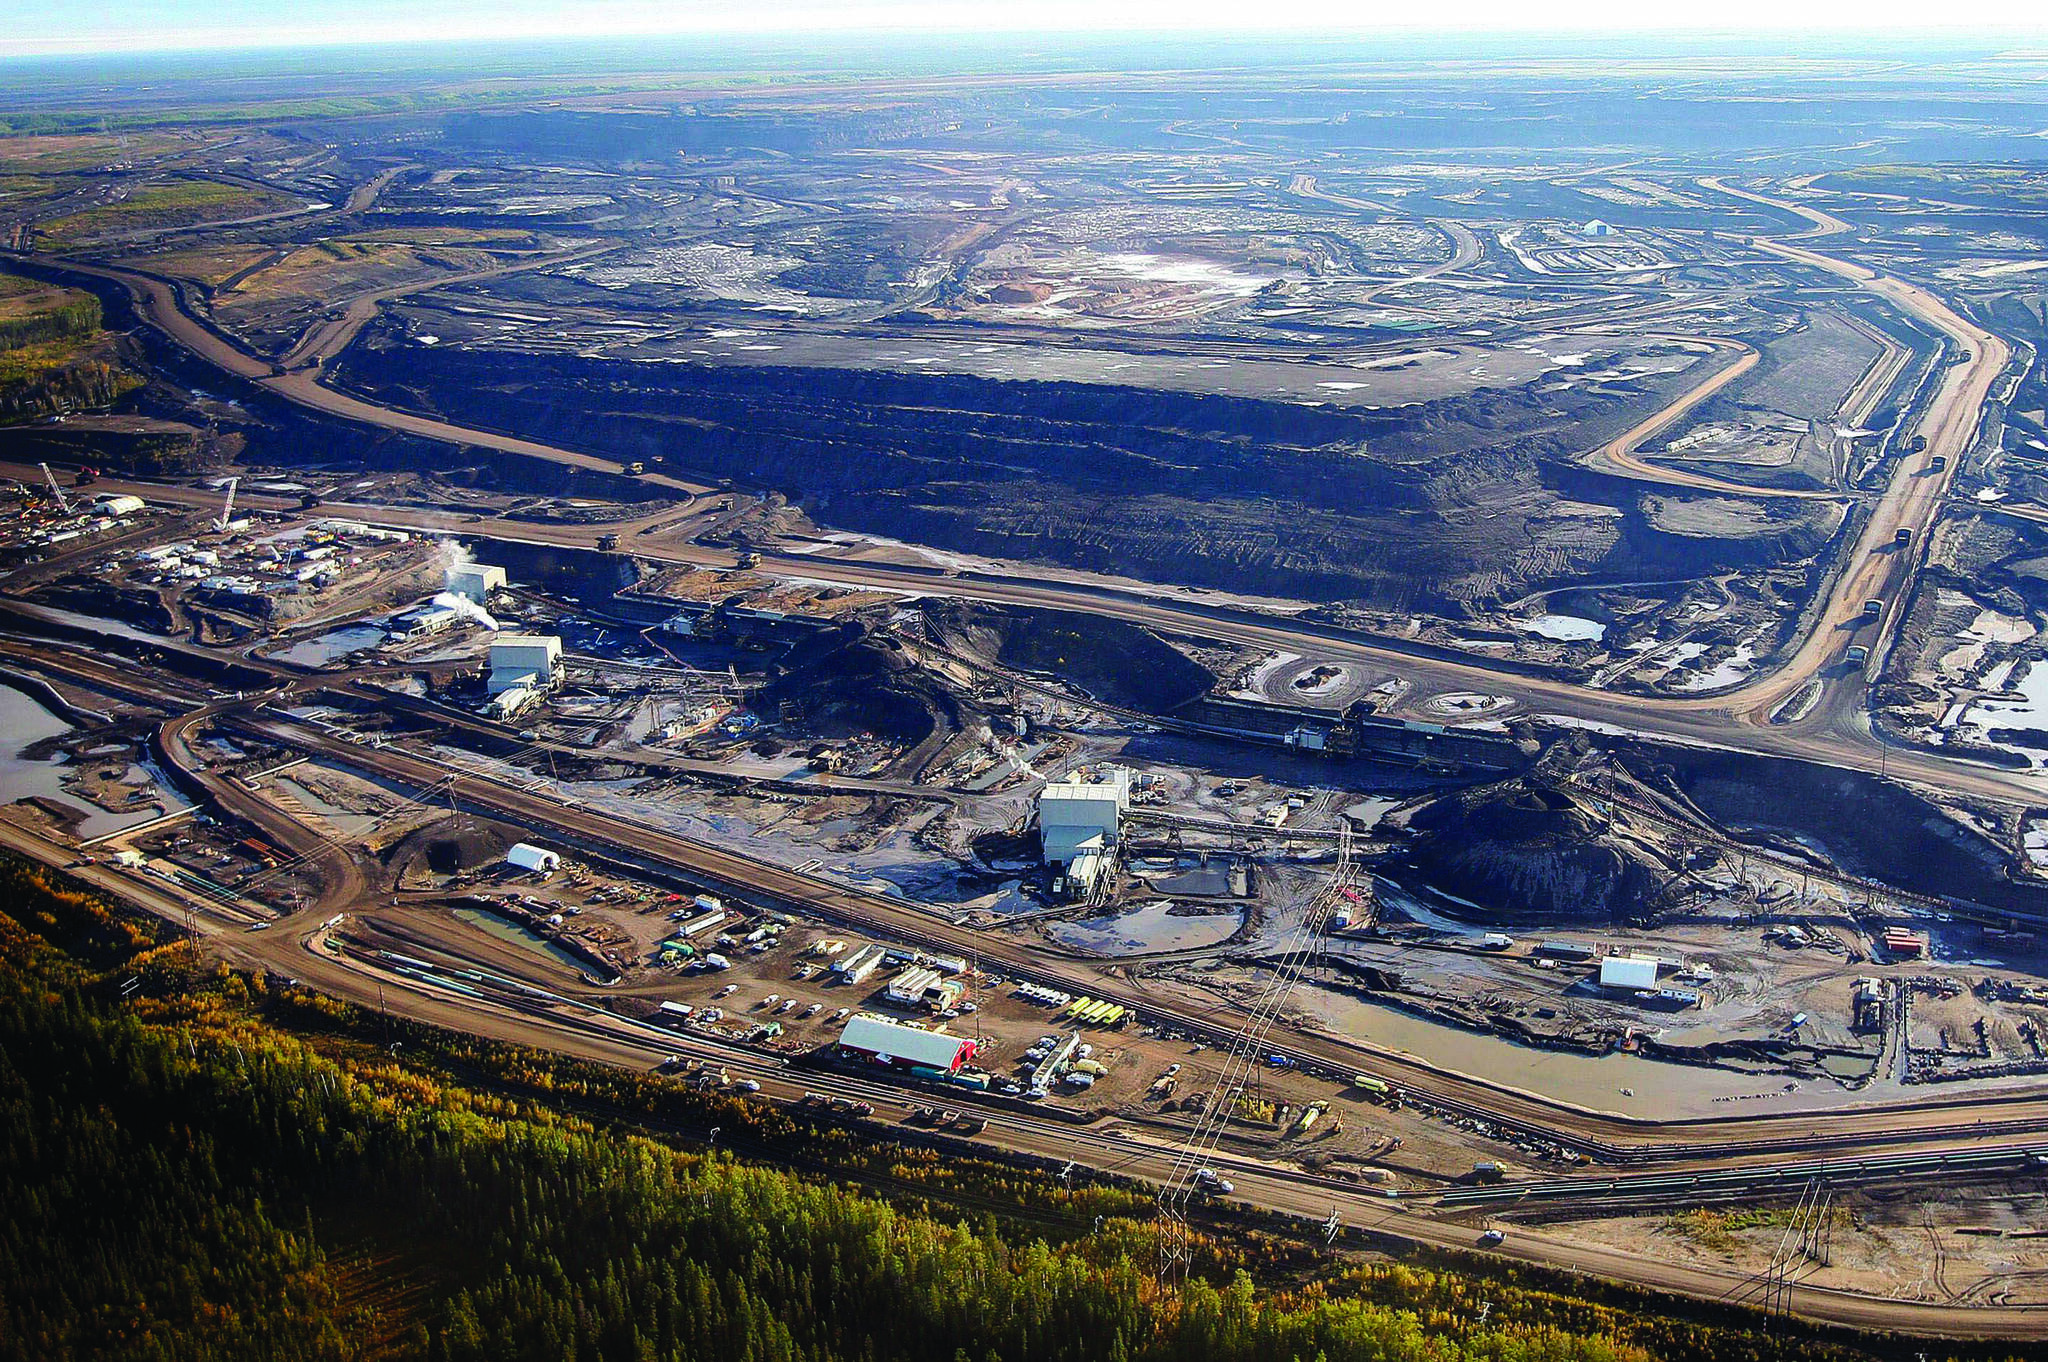 This Sept. 19, 2011 aerial photo shows a tar sands mine facility near Fort McMurray, in Alberta. A new wave of cold water is about to hit Canada’s much-buffeted oilsands industry but whether the storm will be perfect or another tempest in a teapot is yet to be determined. THE CANADIAN PRESS/Jeff McIntosh